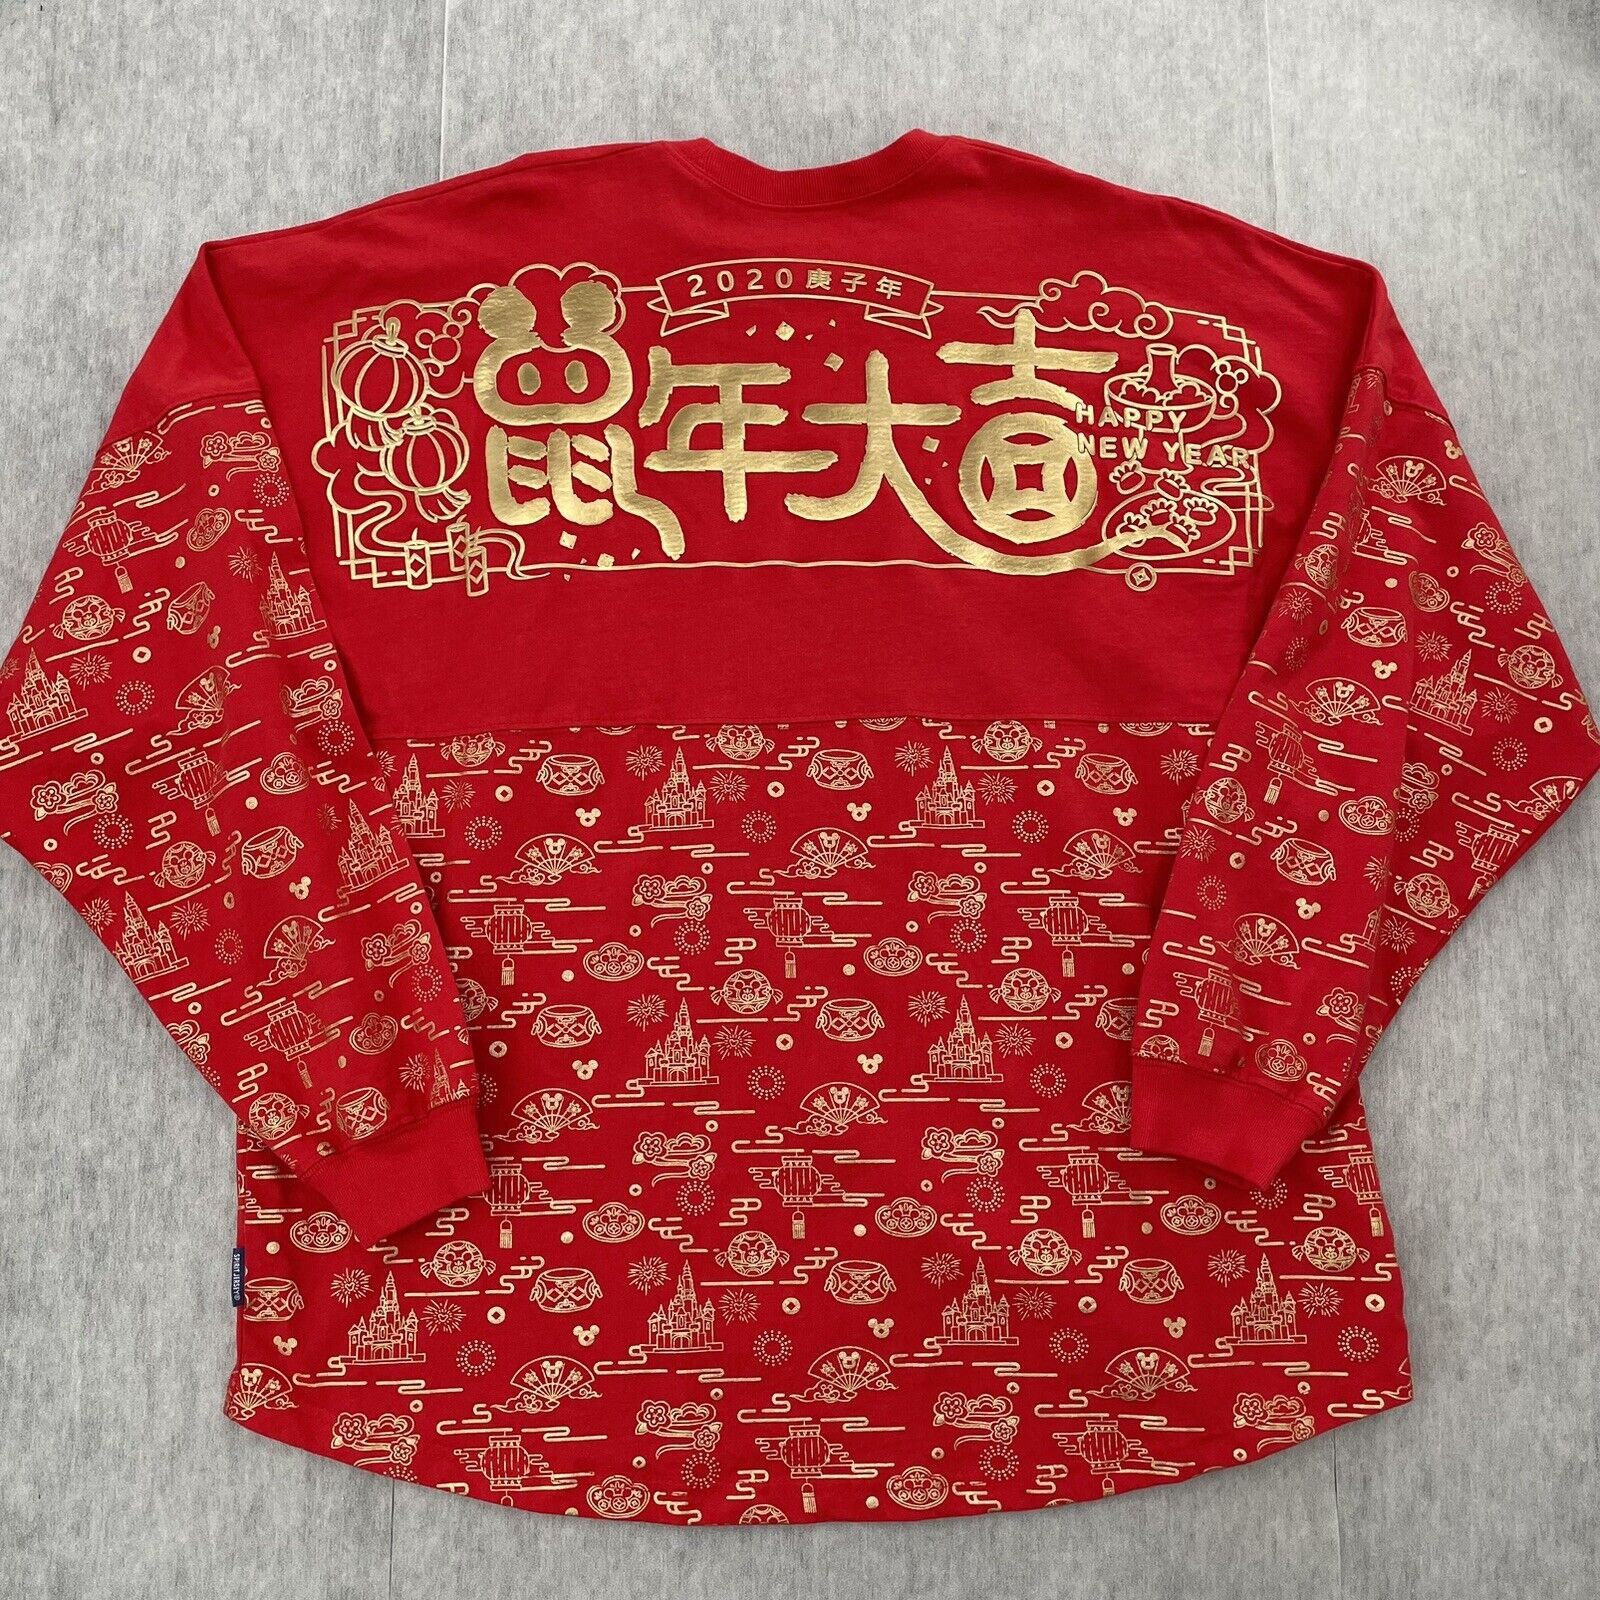 Disney Parks Spirit Jersey Shirt Adult XL Red Chinese New Year 2020 Long Sleeve